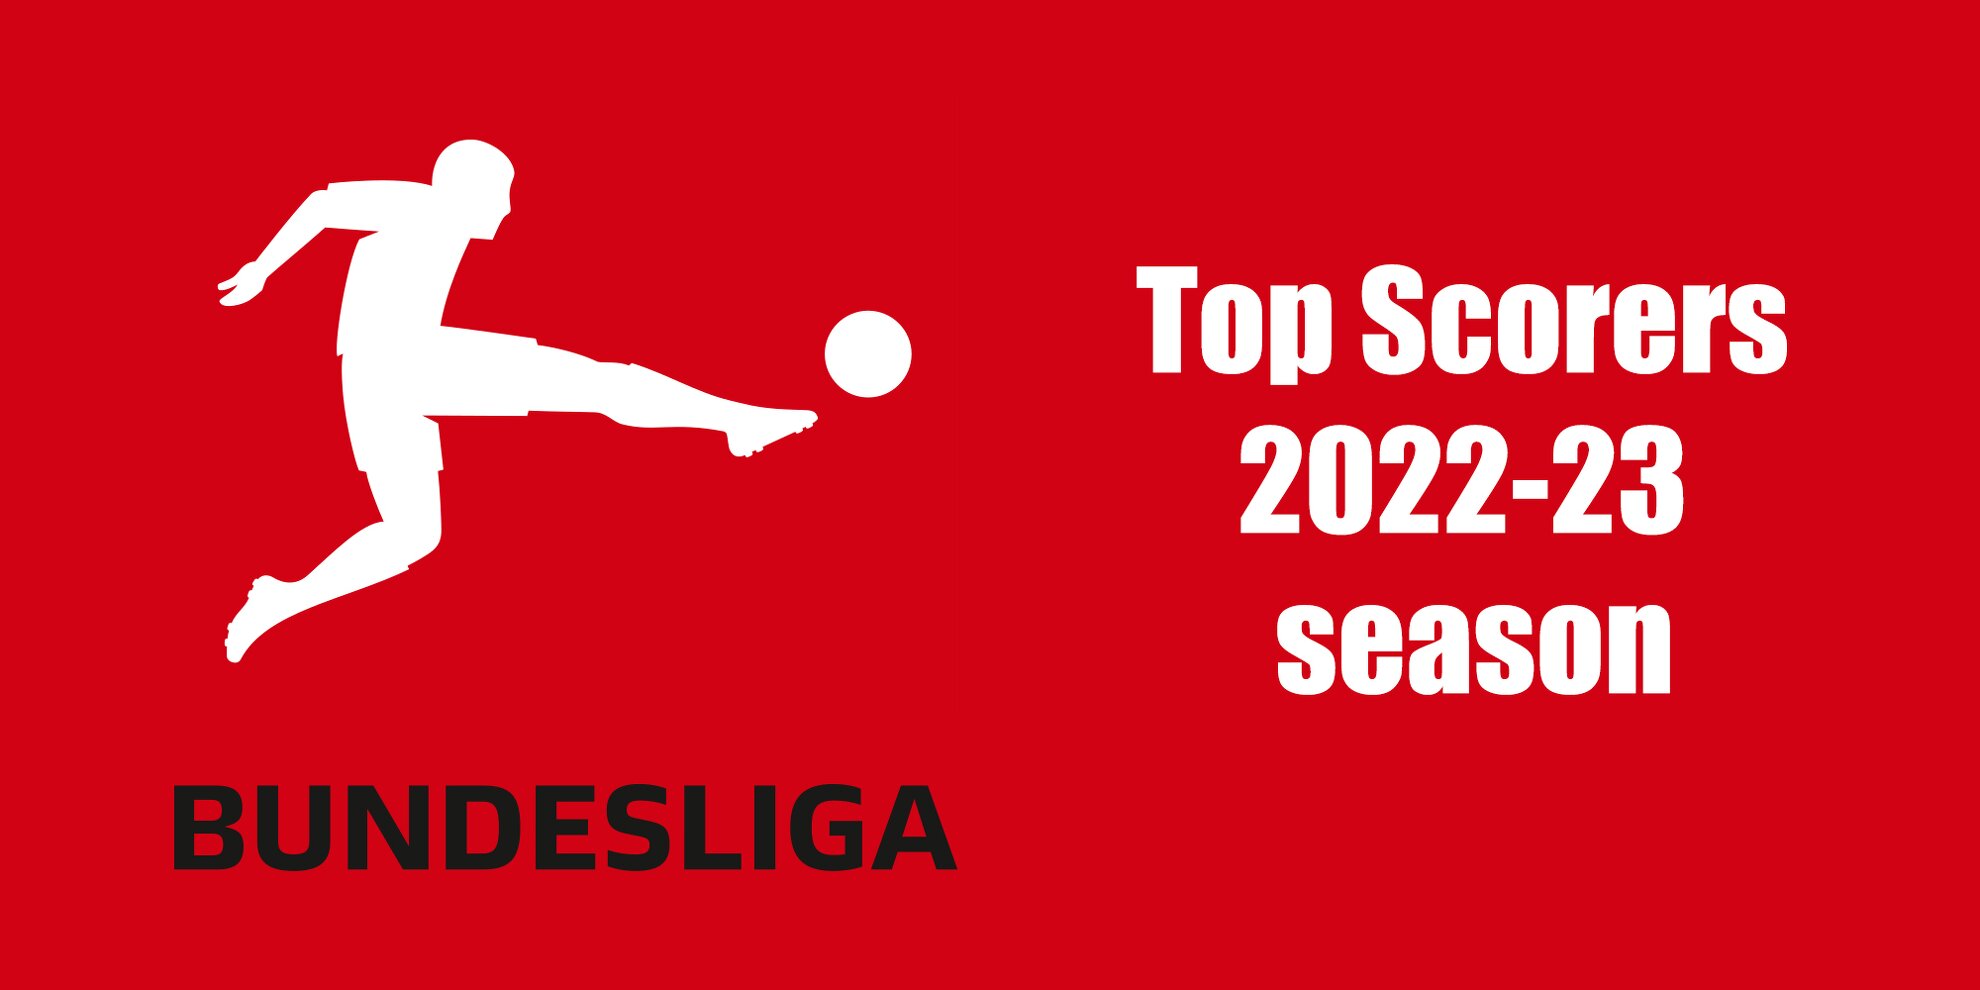 Top 10 players with the most goals in Bundesliga 2022-23 